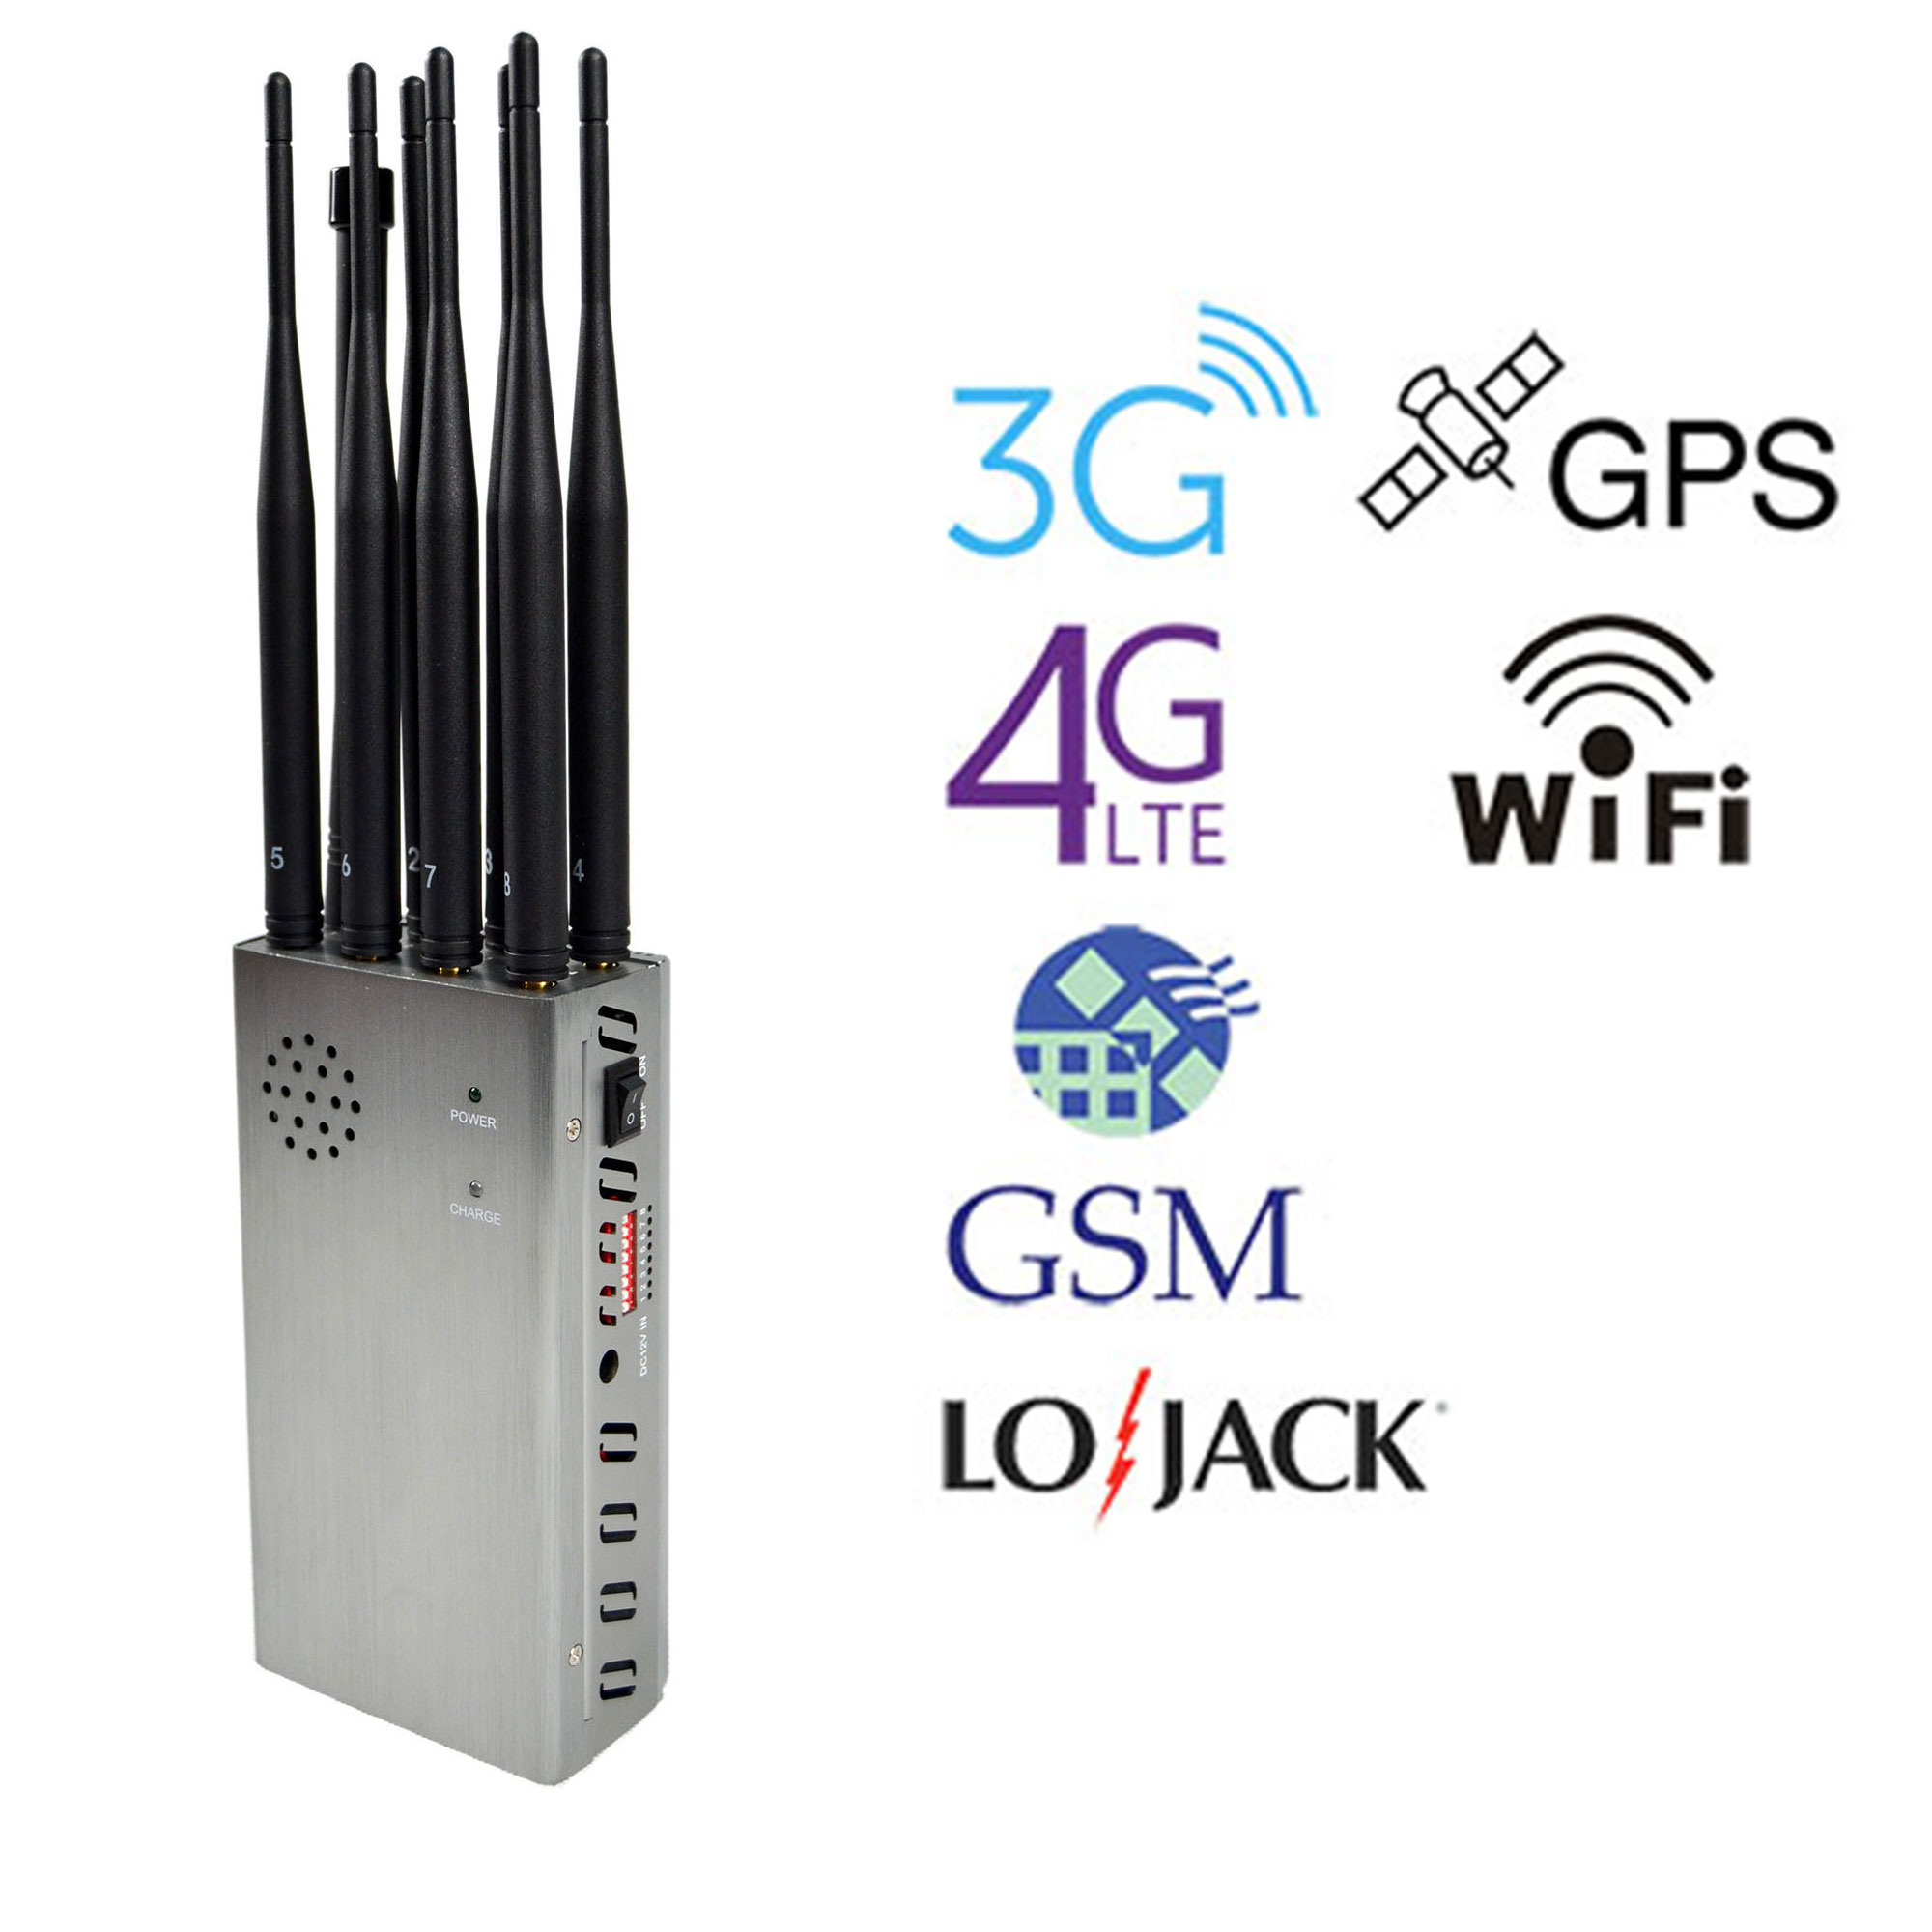 jammer nut key napa | Portable 8 Antennas Cell Phone Jammers With 2g 3G 4G And LOJACK GPS WIFI Signals